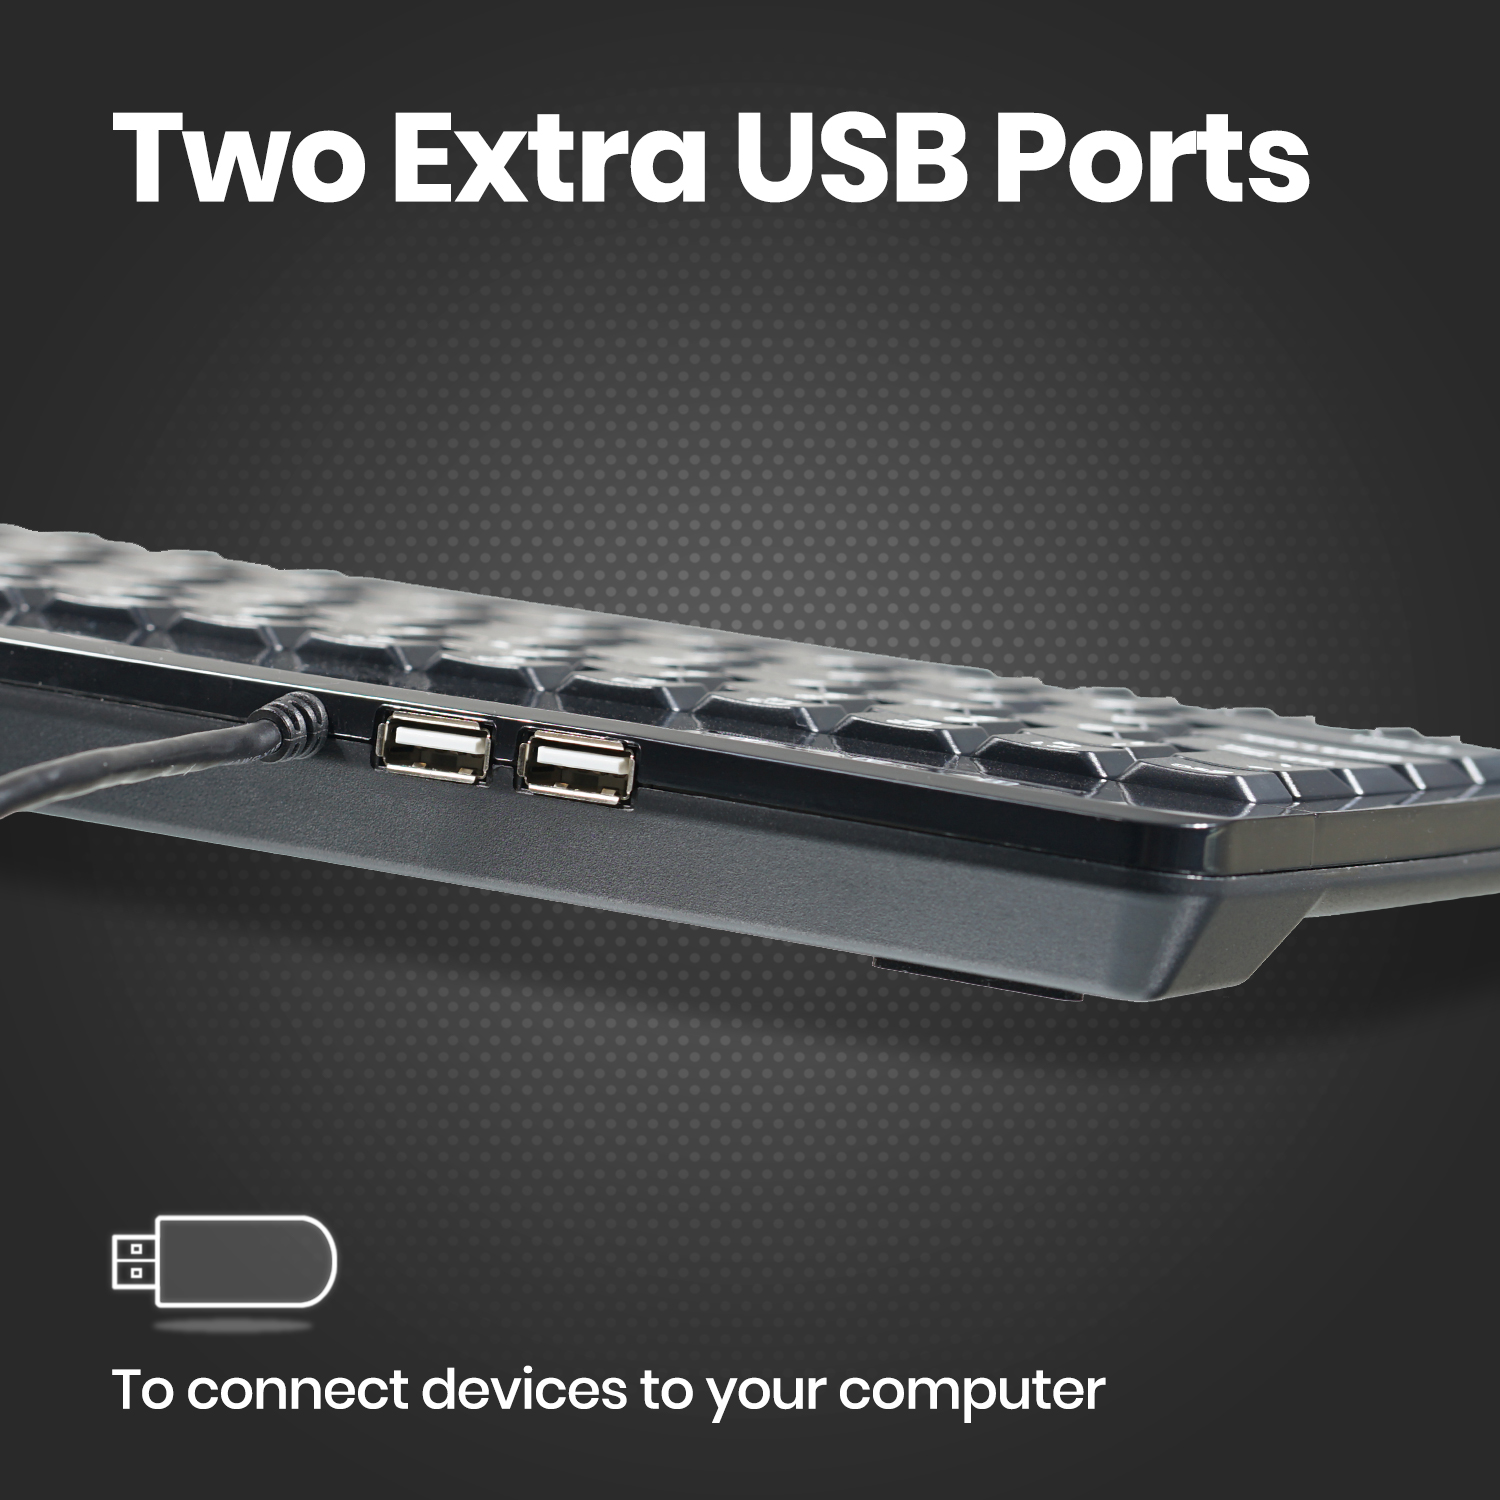 Two Extra USB Ports